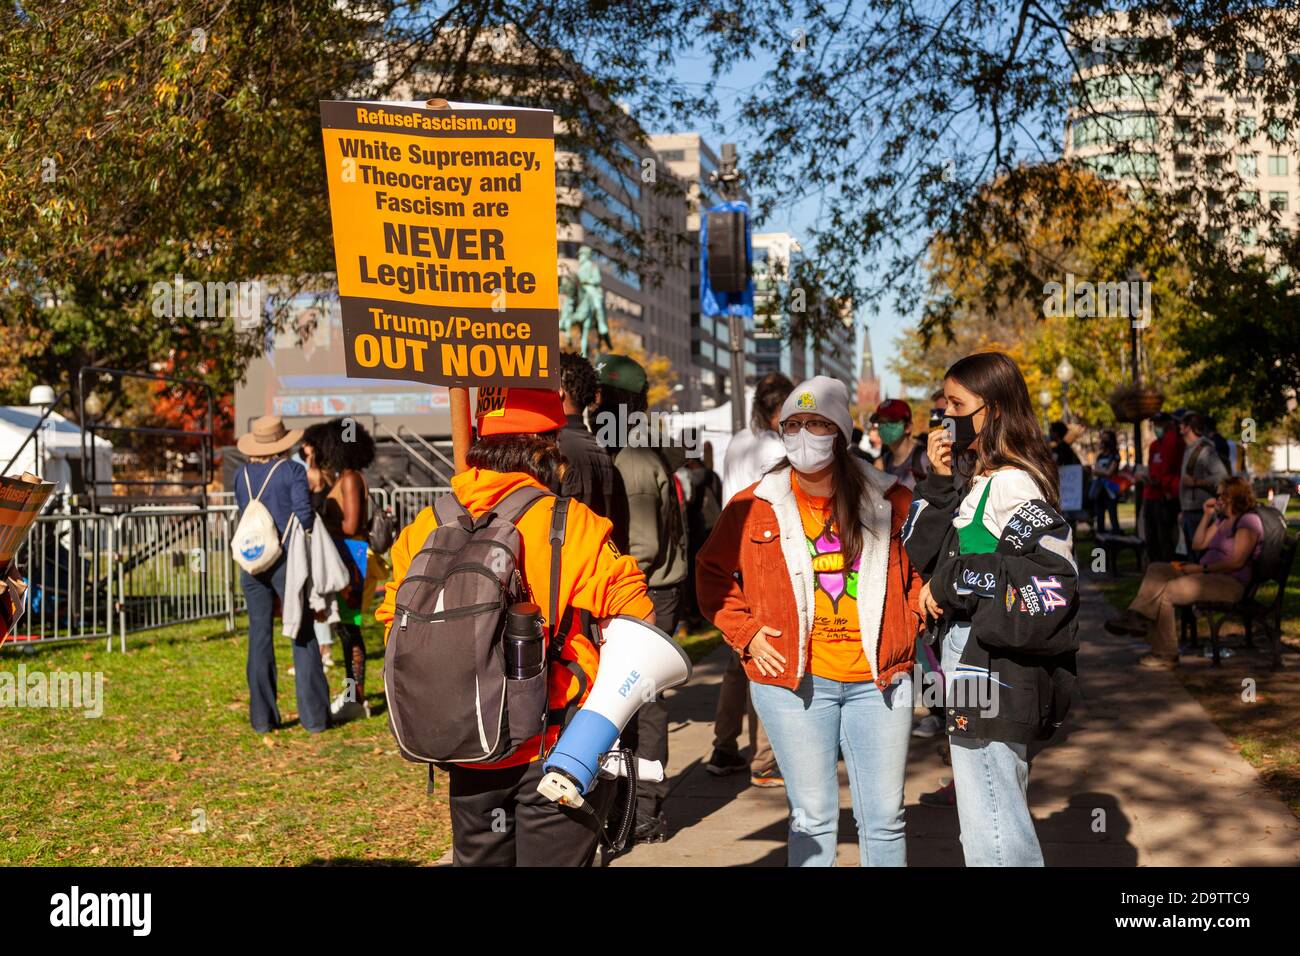 Washington DC, USA, 11/06/2020: After the elections, Anti-Trump Protesters make demonstrations in Black Lives Matter Plaza near White House. A woman i Stock Photo